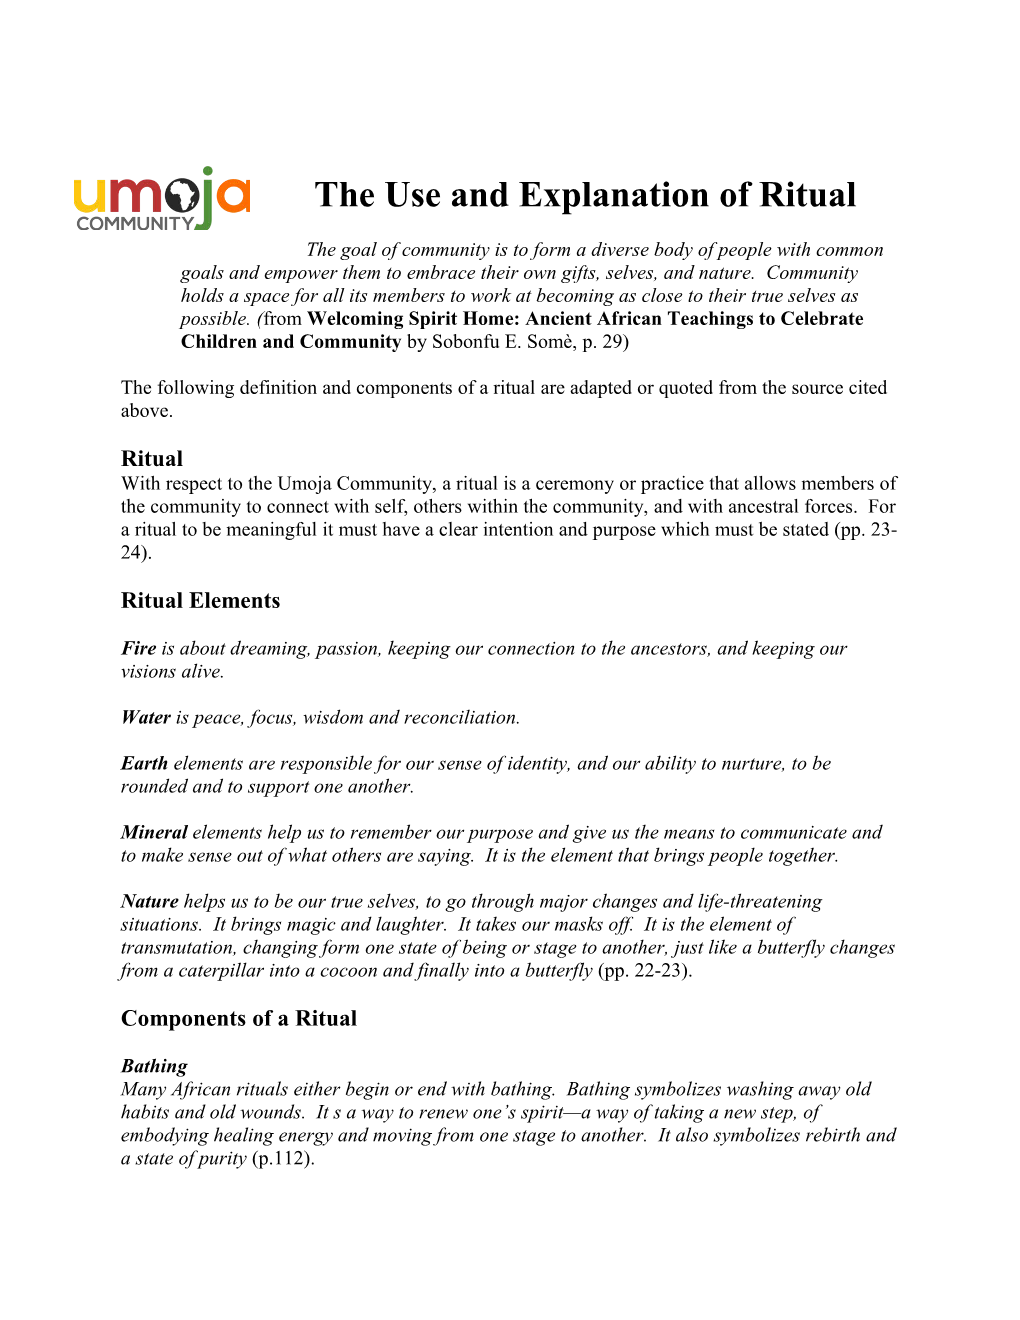 The Use and Explanation of Ritual